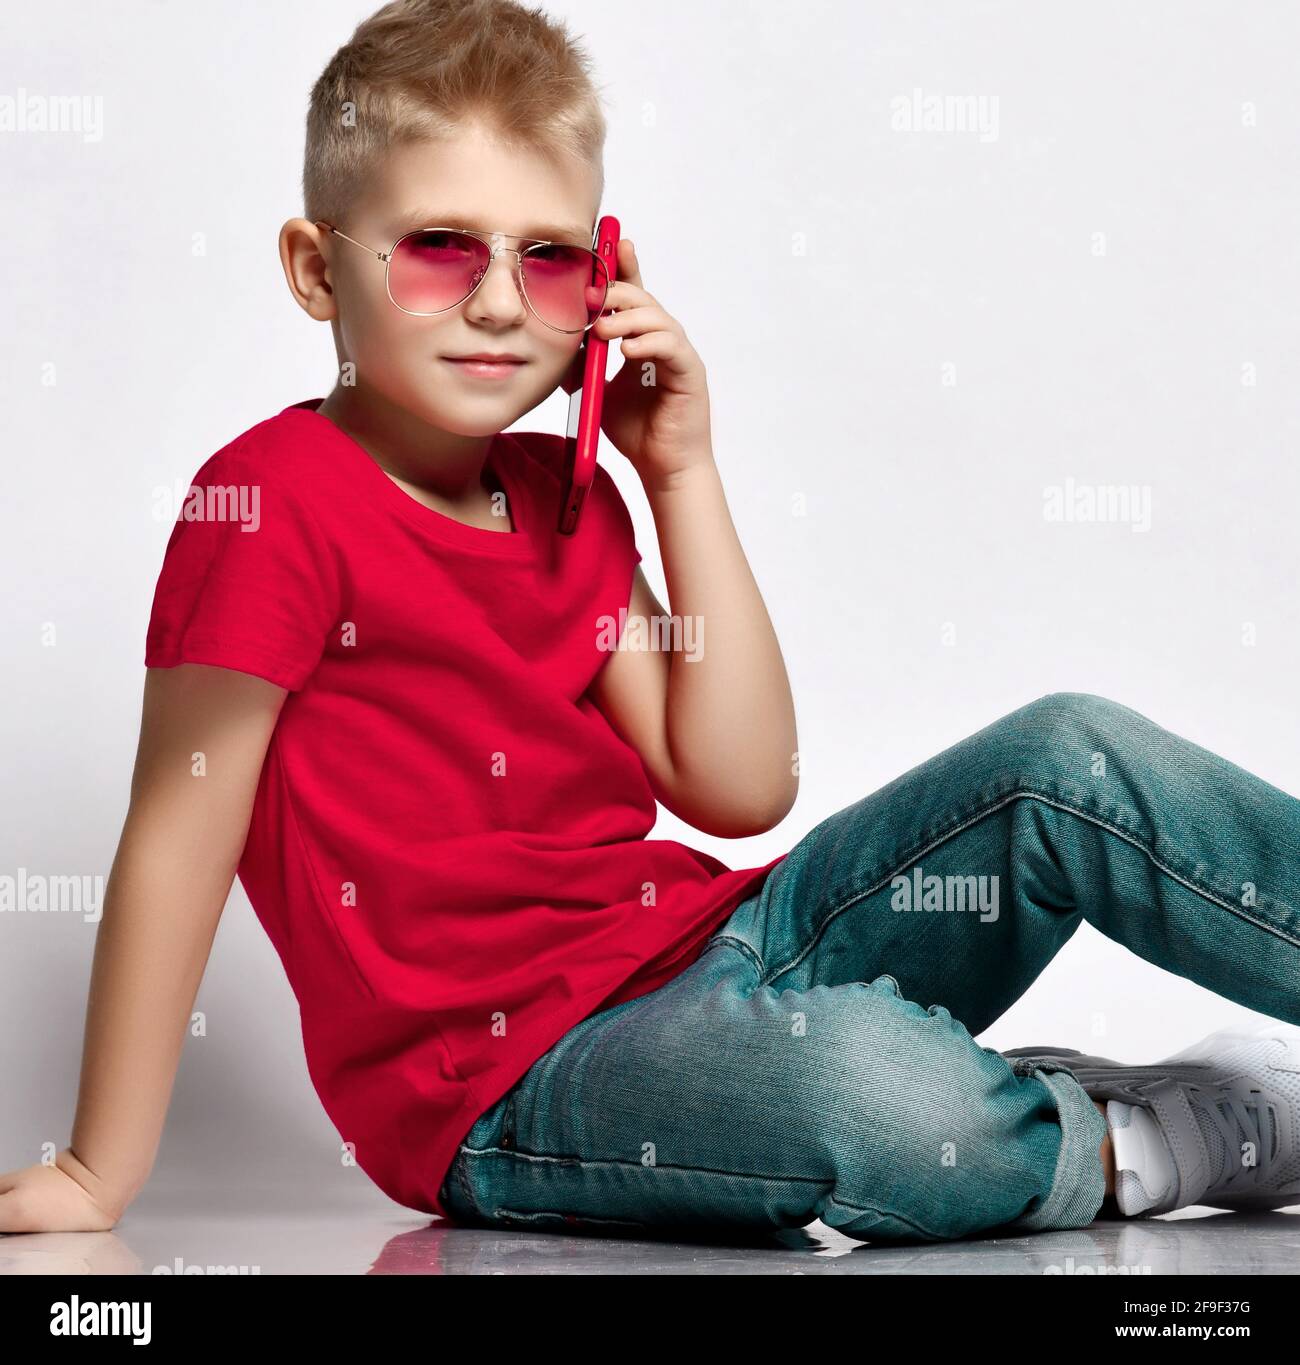 Stylish kid boy child in red t-shirt, jeans, sneakers and sunglasses sitting on floor talking on smartphone Stock Photo